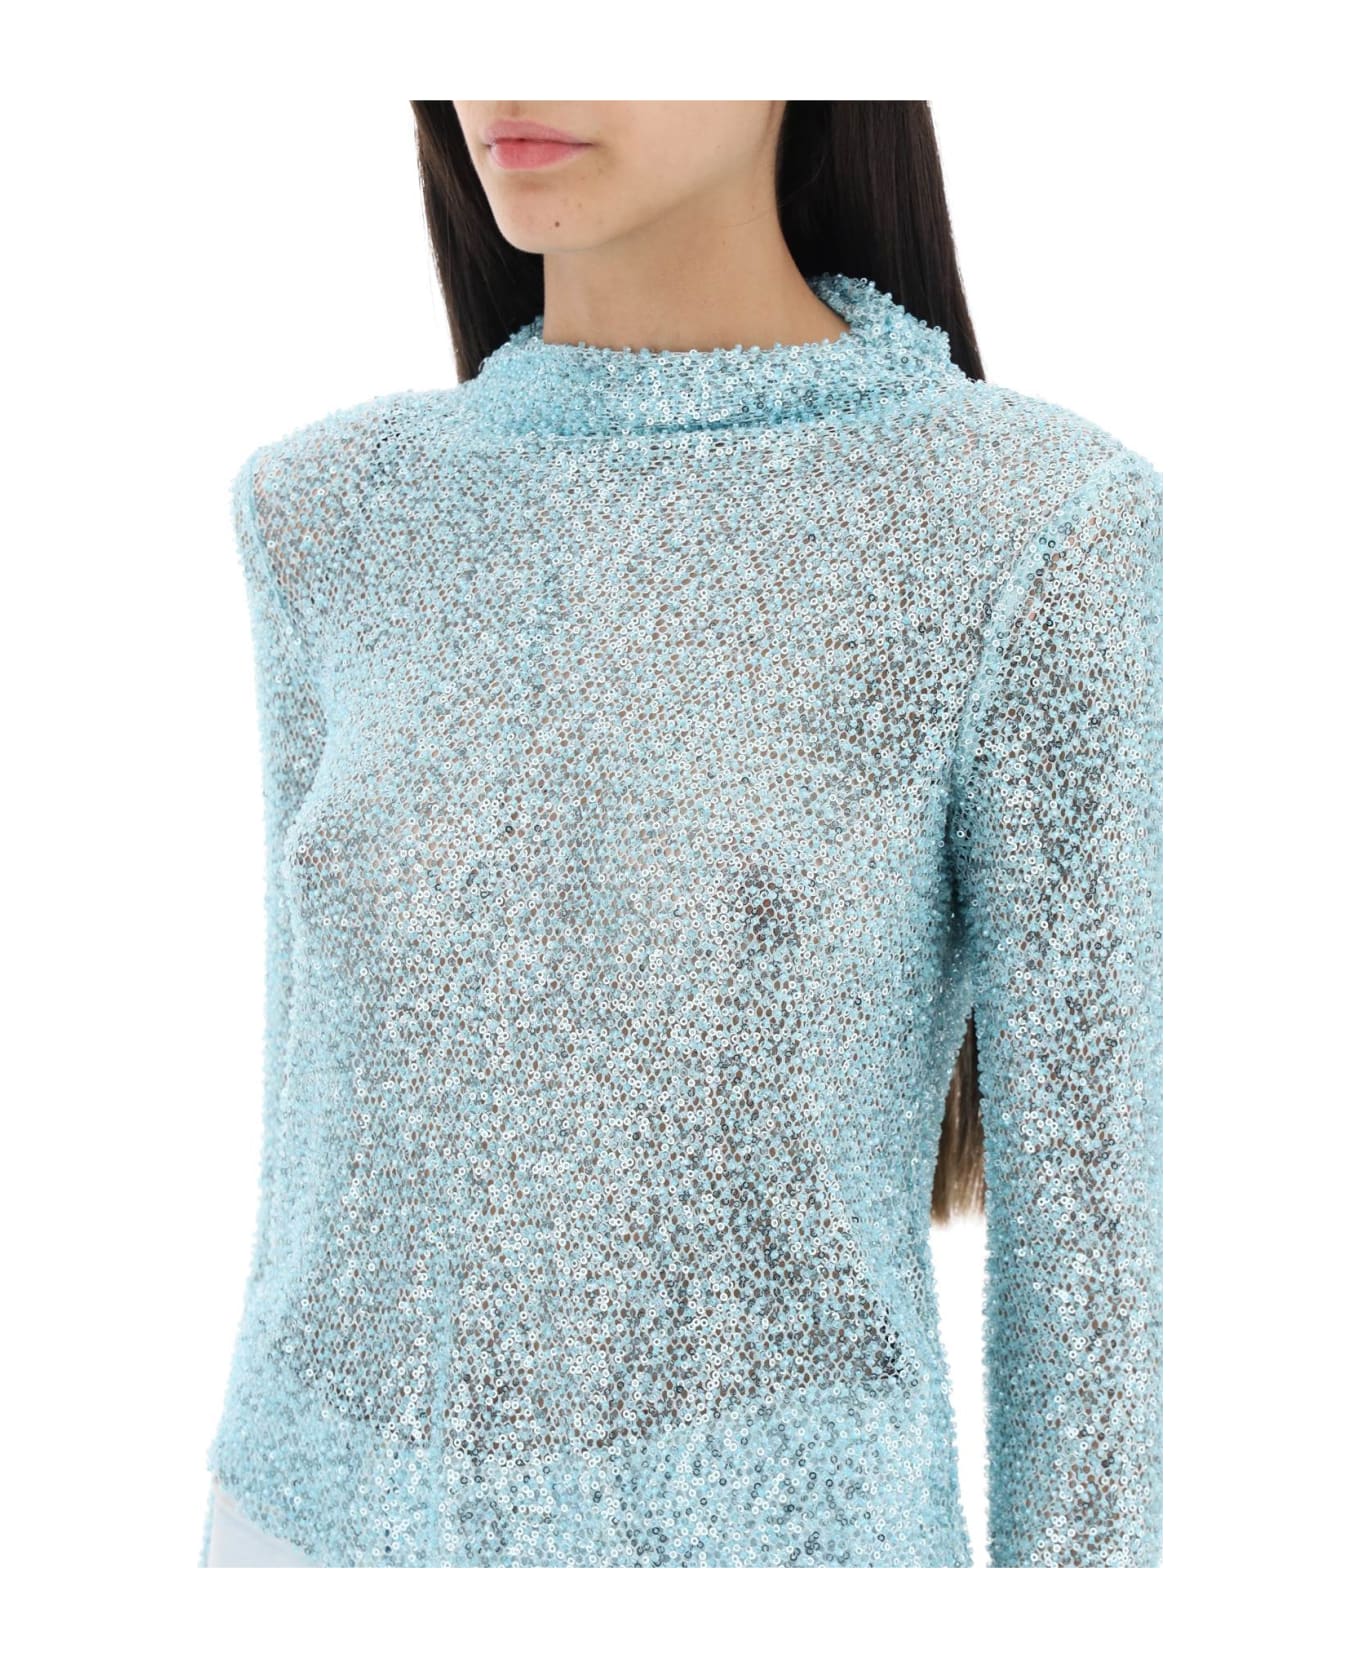 self-portrait Long-sleeved Top With Sequins And Beads - BLUE (Light blue)